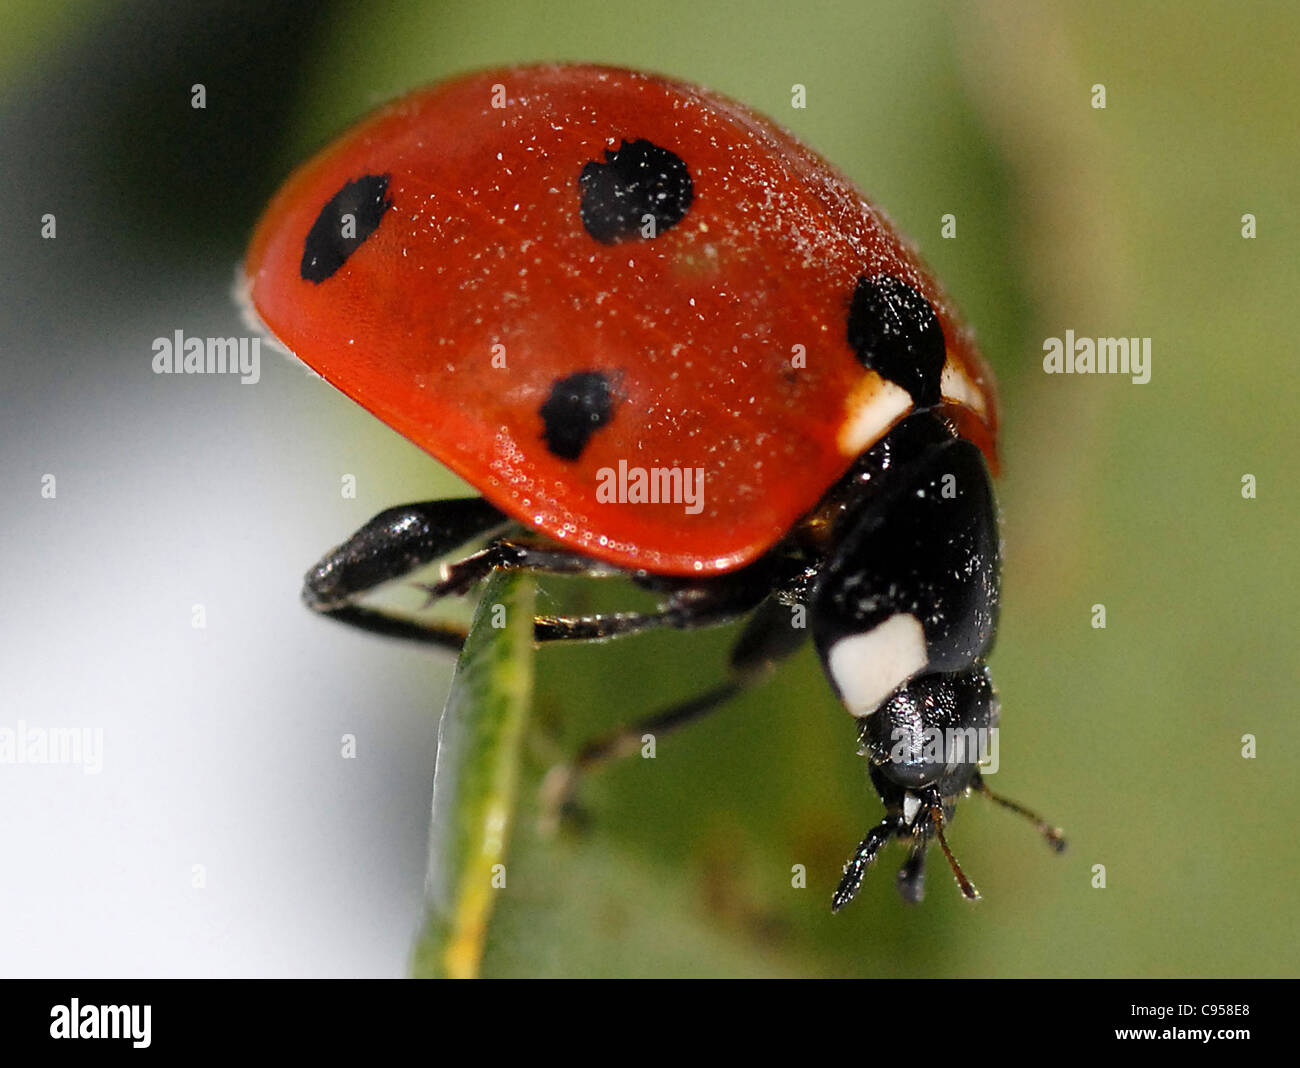 Seven-spot ladybird (Coccinella 7-punctata) These are small round beetles with three and a half spots on each of their two elytra (wing cases). The thorax is black with two white marks at the side, and the head is small and black. Stock Photo